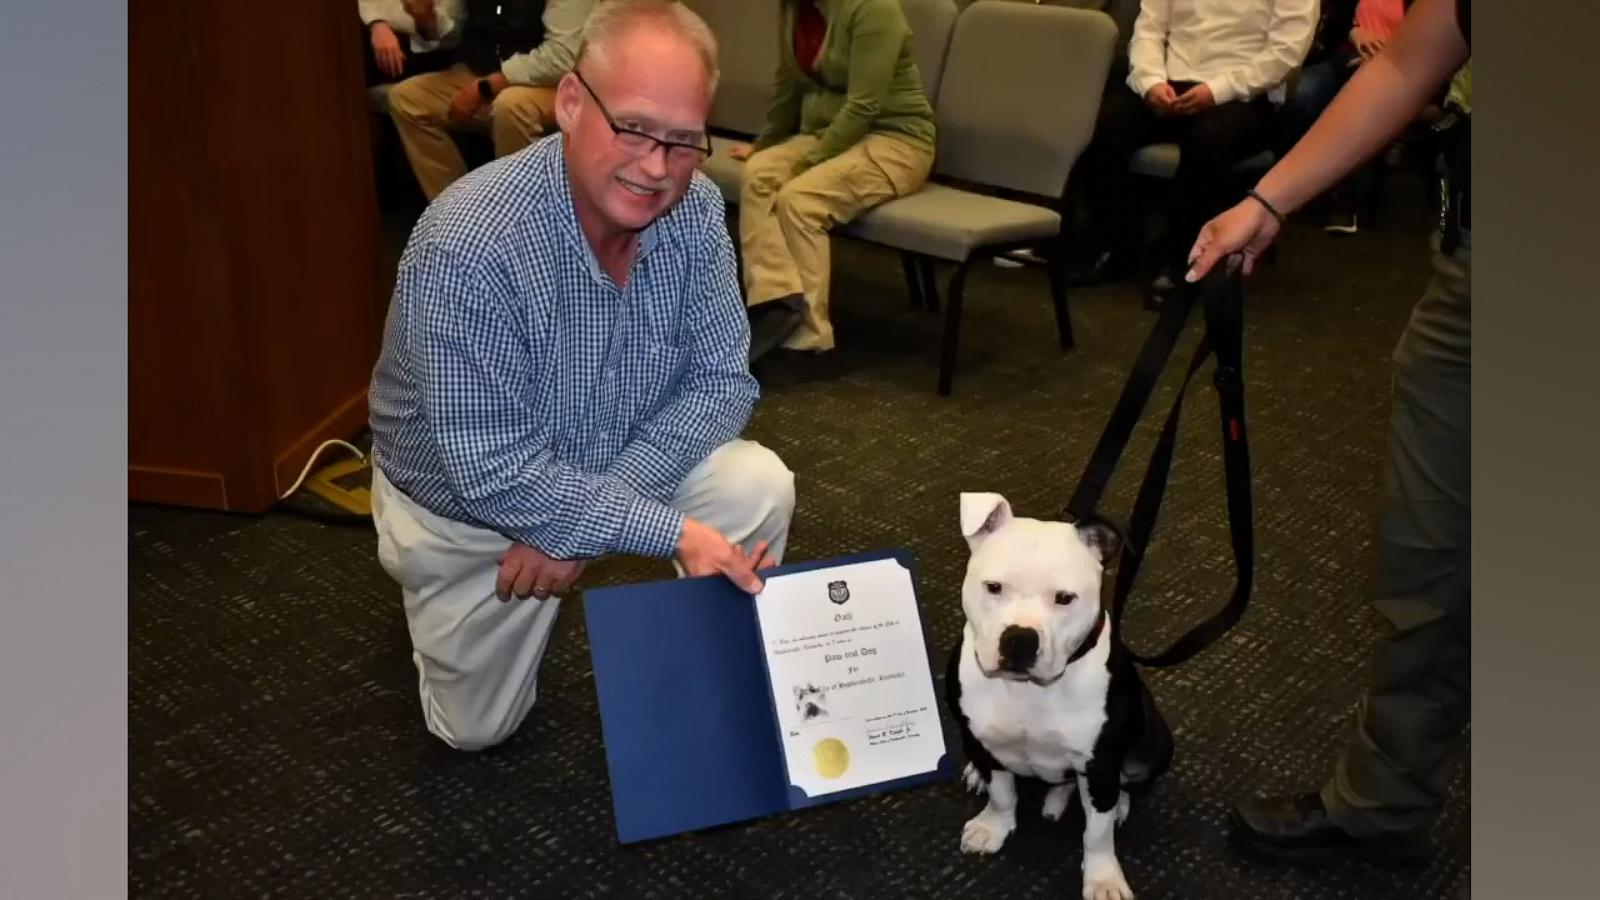 VIDEO: Rescue dog becomes 'paw-trol officer' after Kentucky police department adopts him